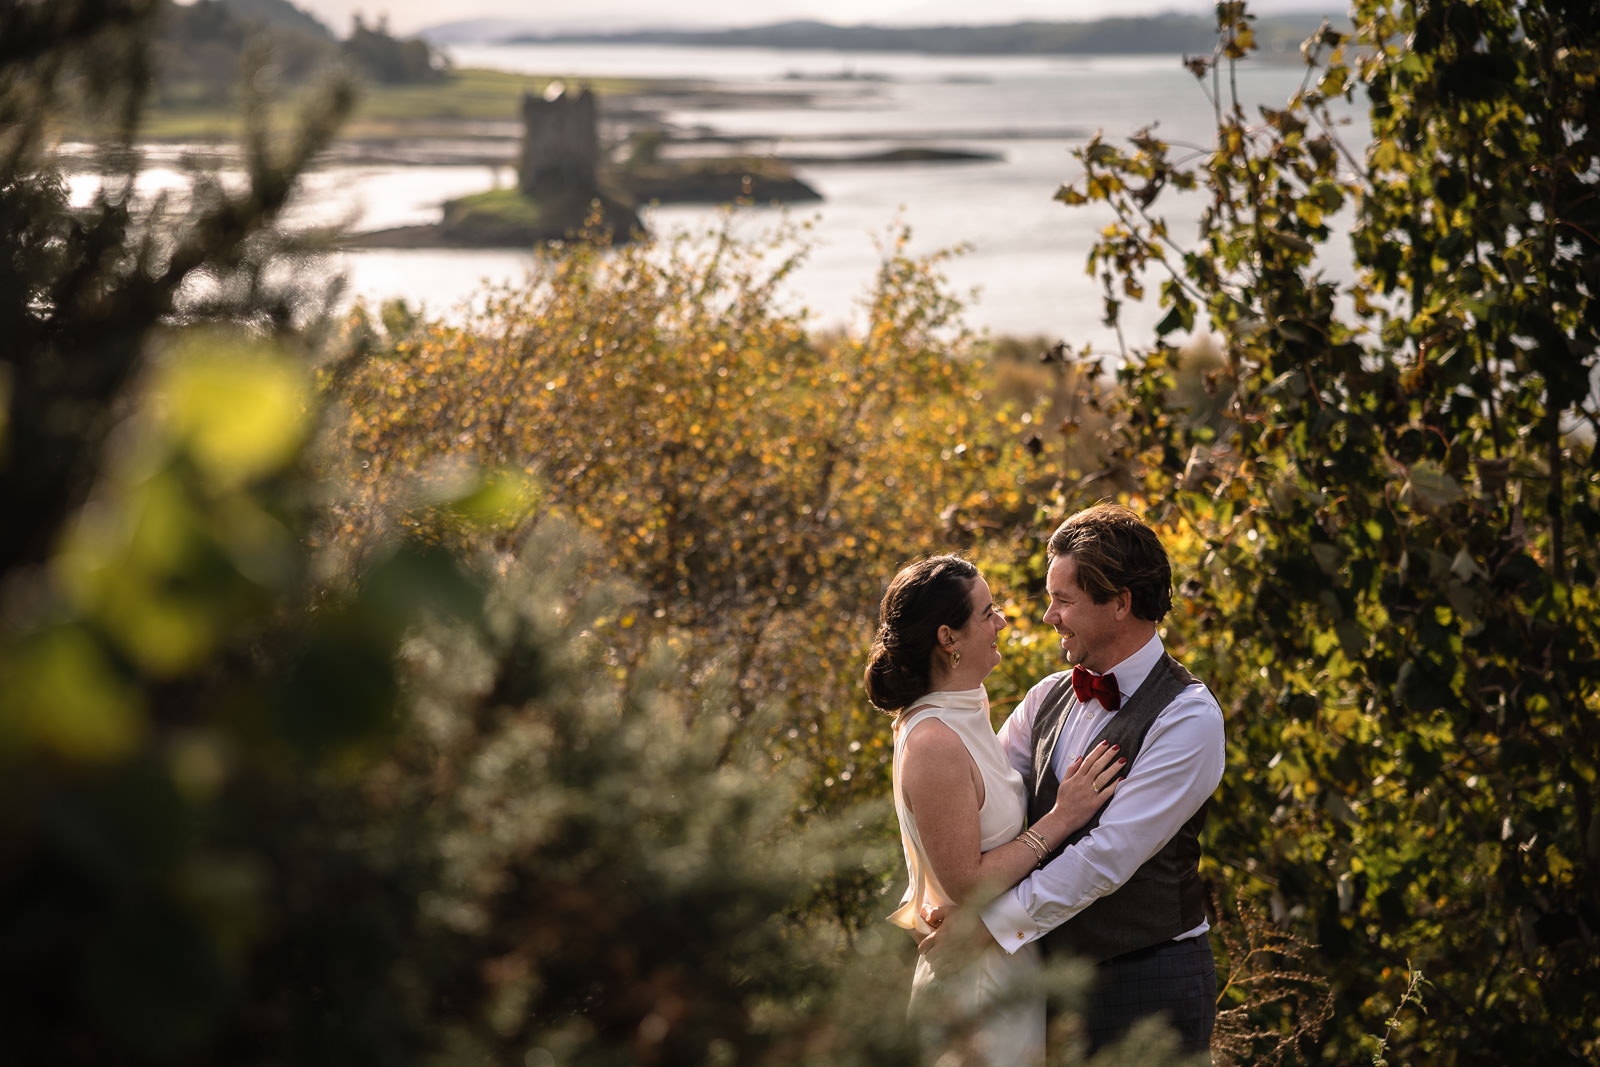 Eloping by Castle in Highlands Scotland with Wedding Photographer